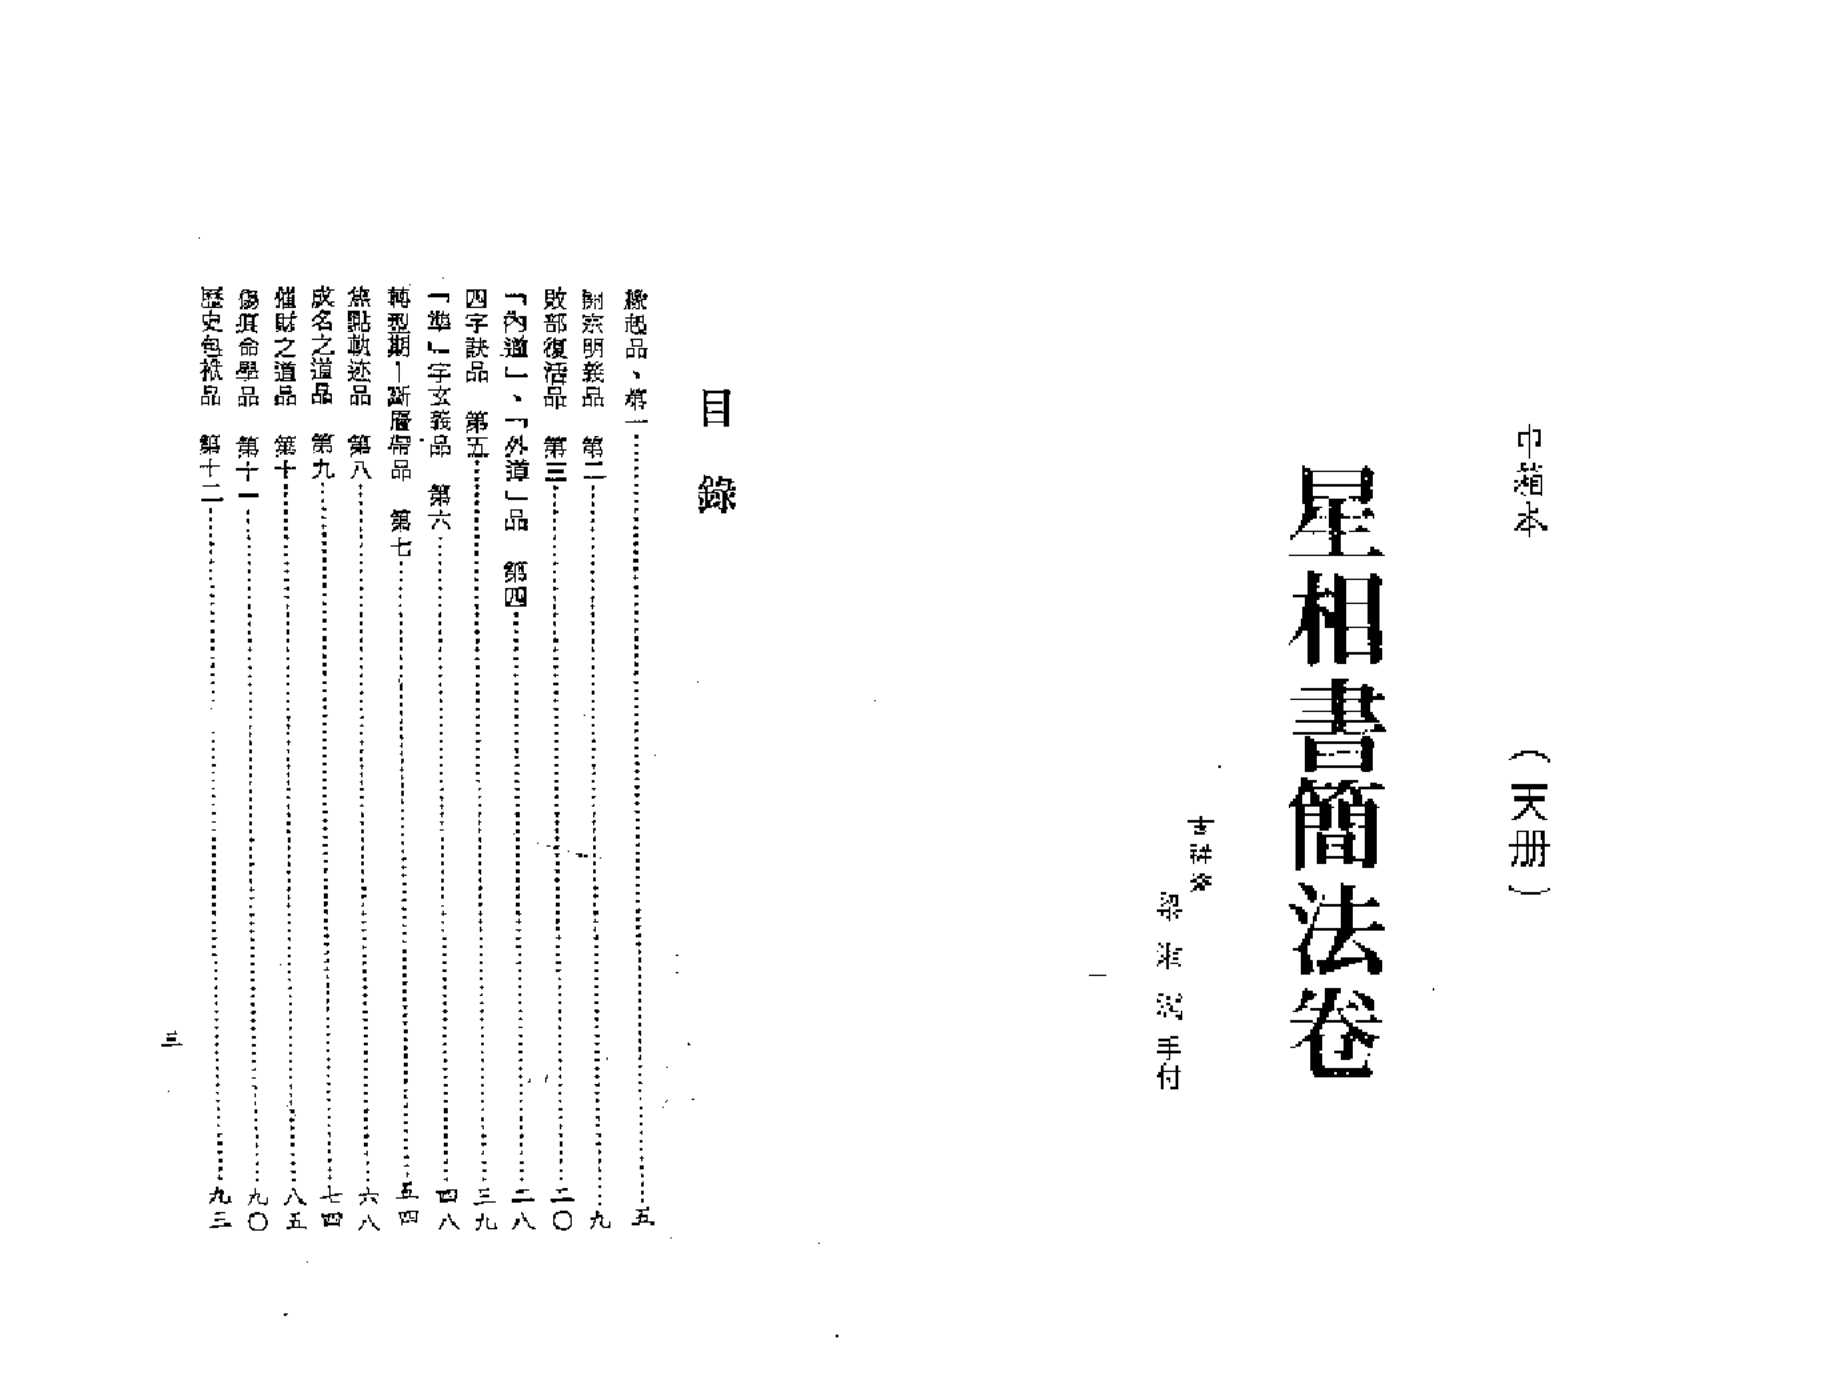 《 Astrological Book of Brief Method Volume 》 (Heavenly Book). By Liang Xiangrun